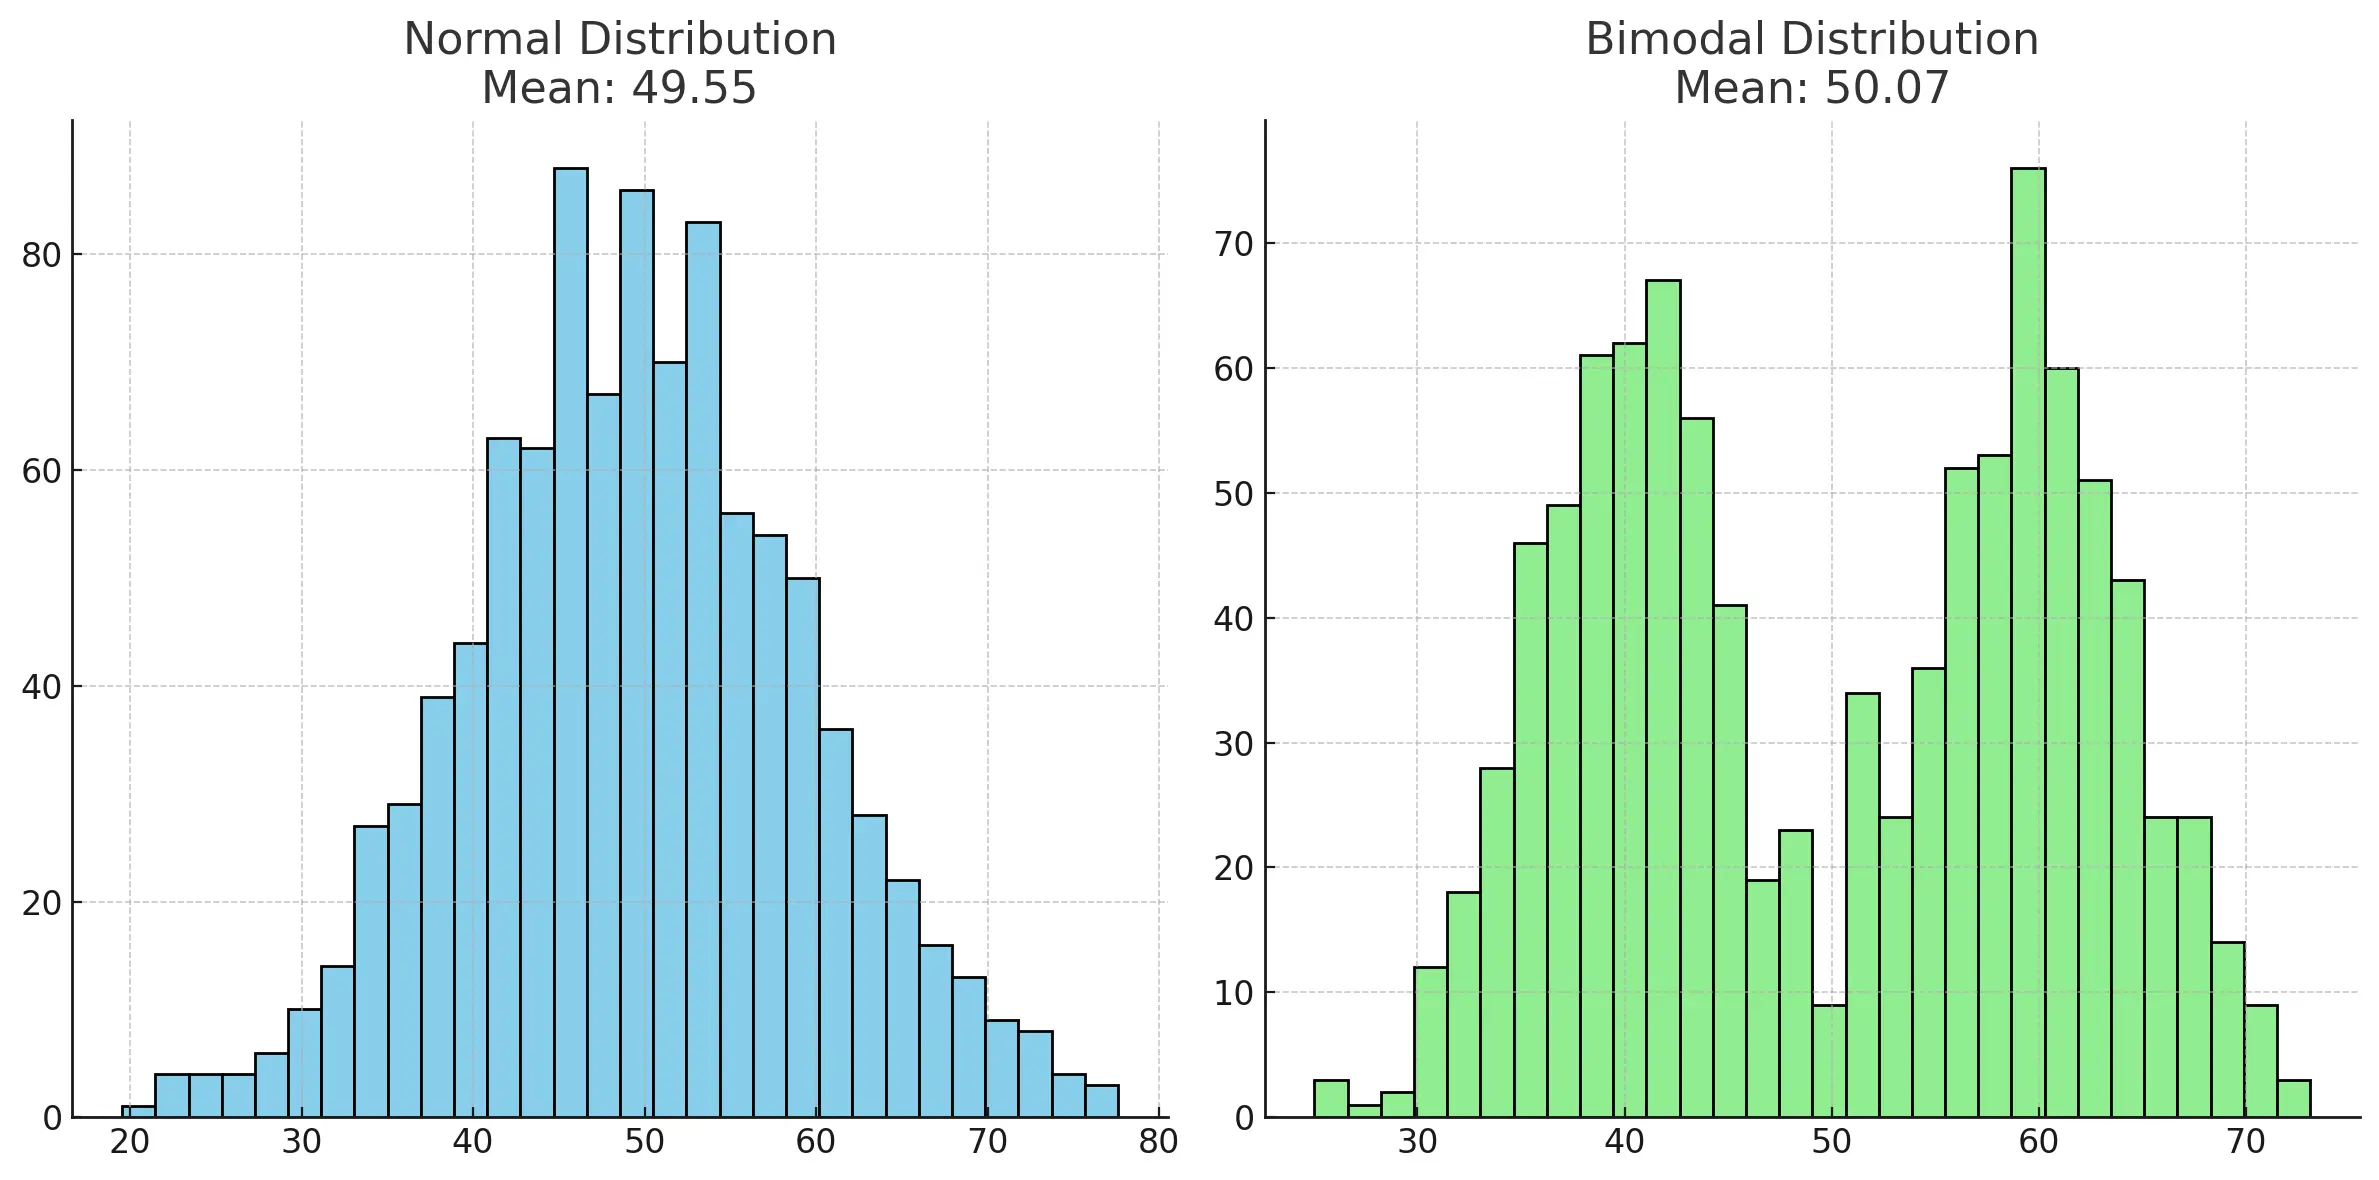 Same mean, different distributions